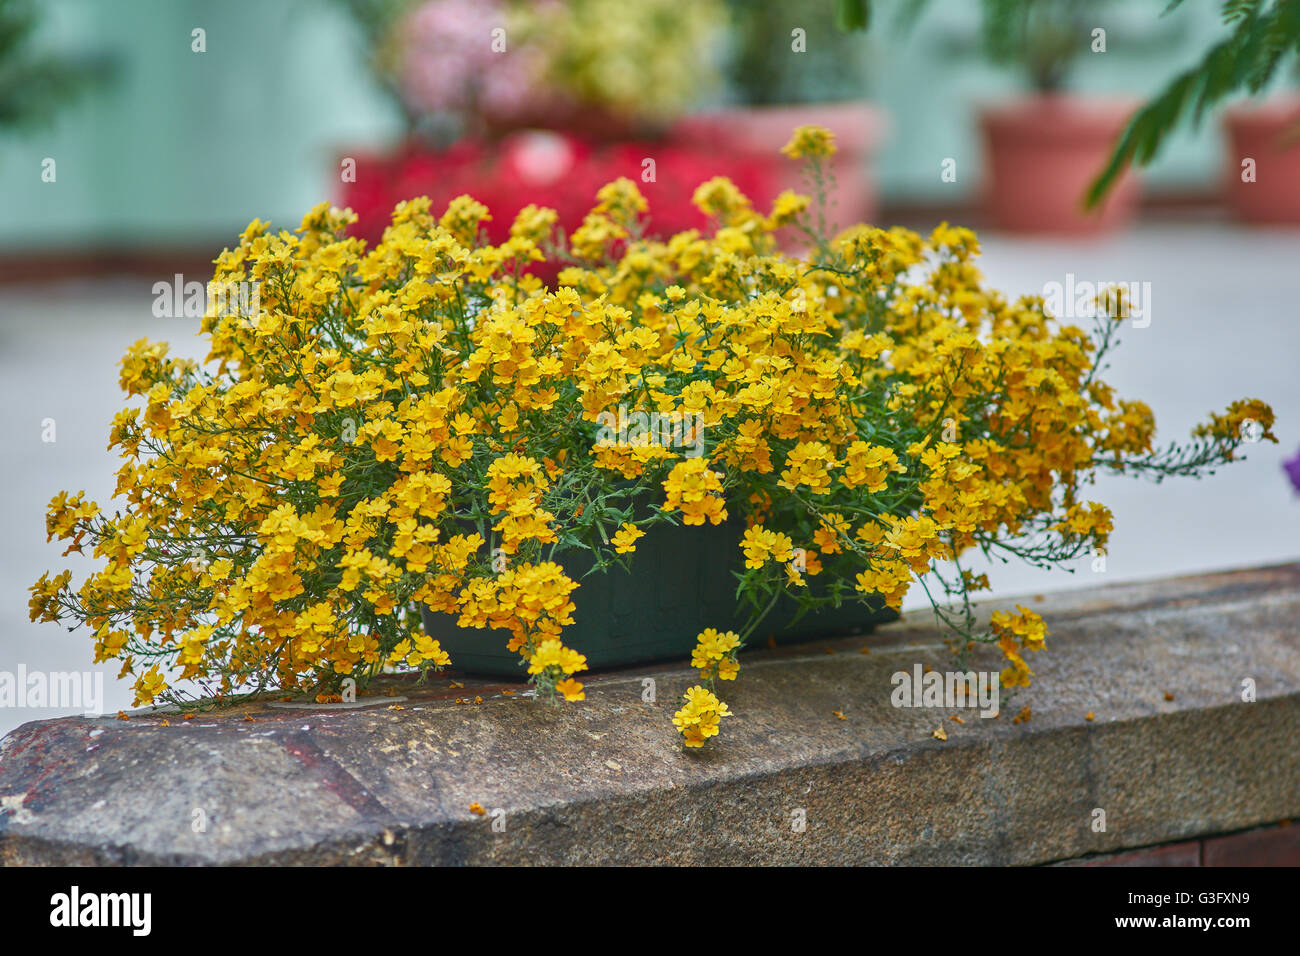 Lush yellow petunias blooming in the flower pot Stock Photo